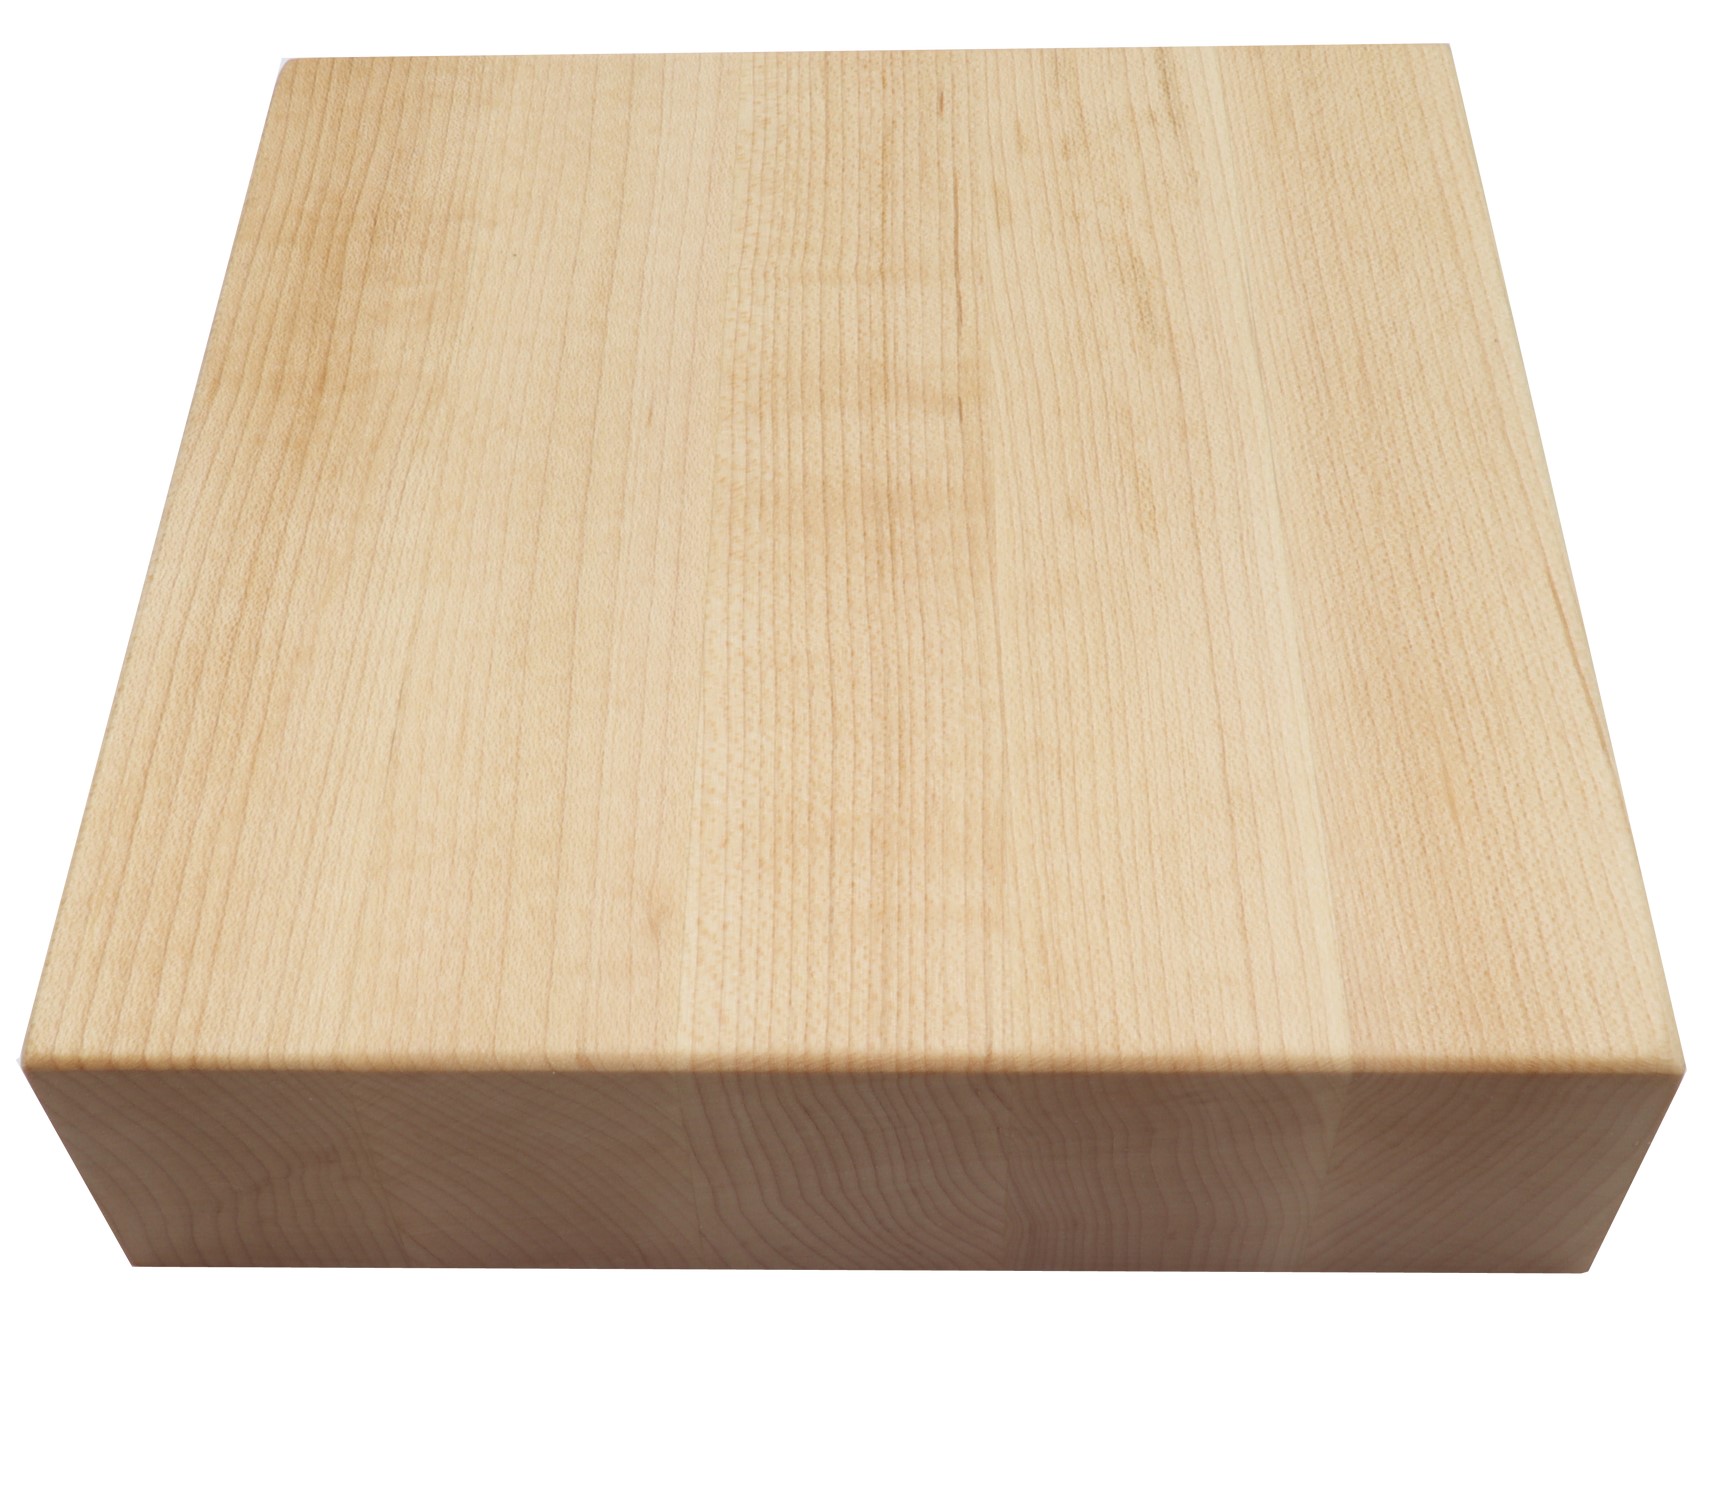 Image Sample of solid wood - select maple oil finish